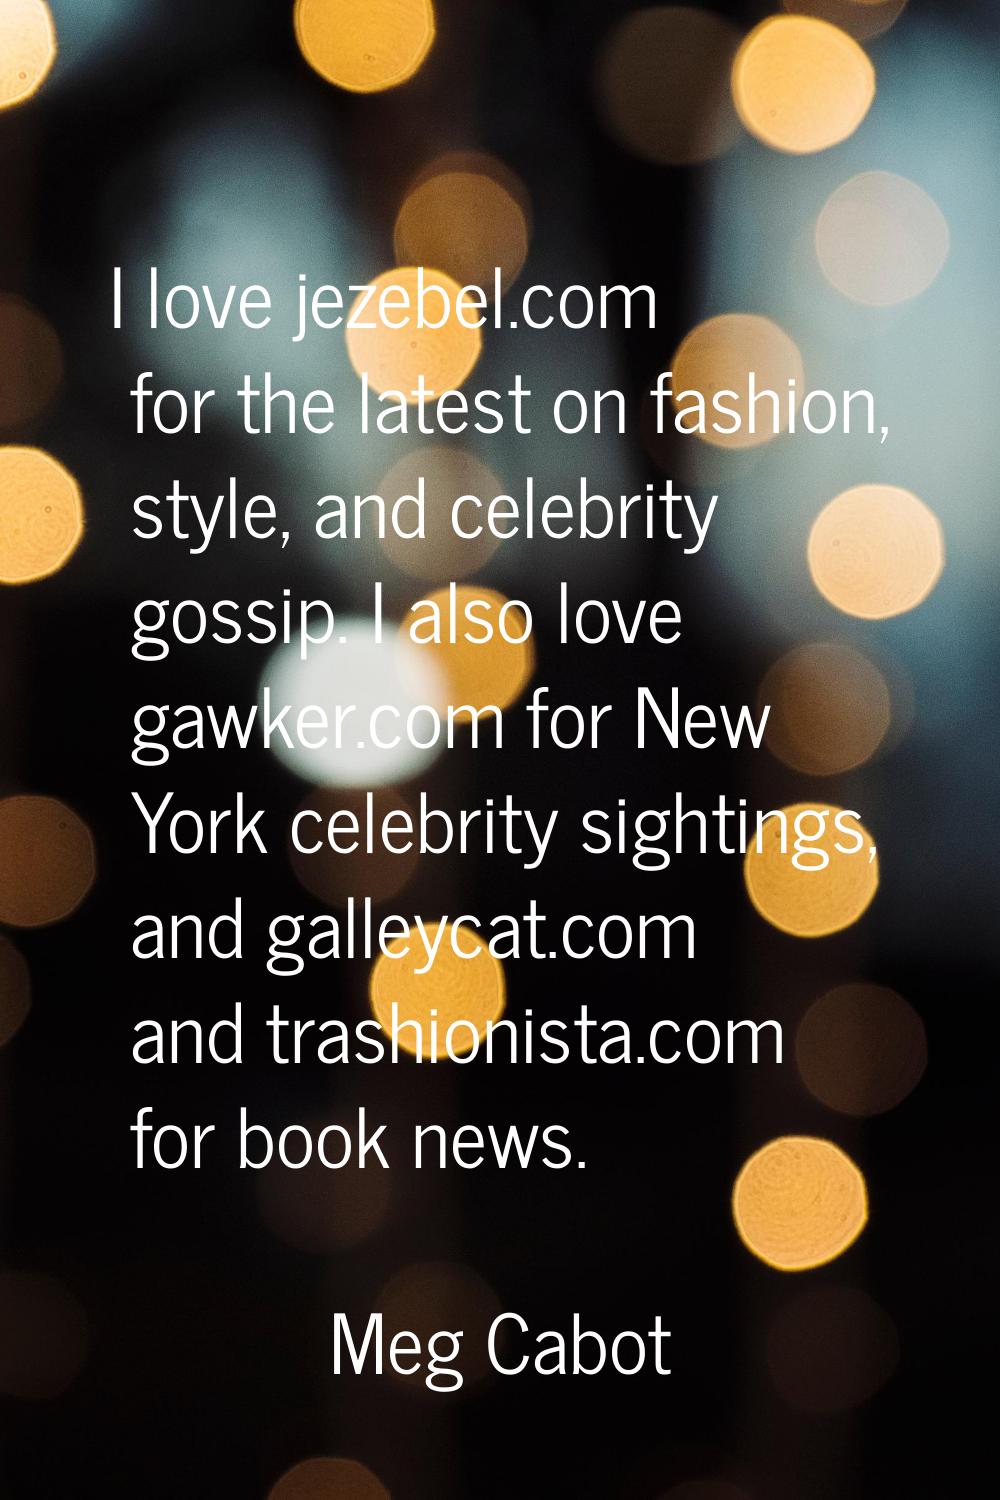 I love jezebel.com for the latest on fashion, style, and celebrity gossip. I also love gawker.com f